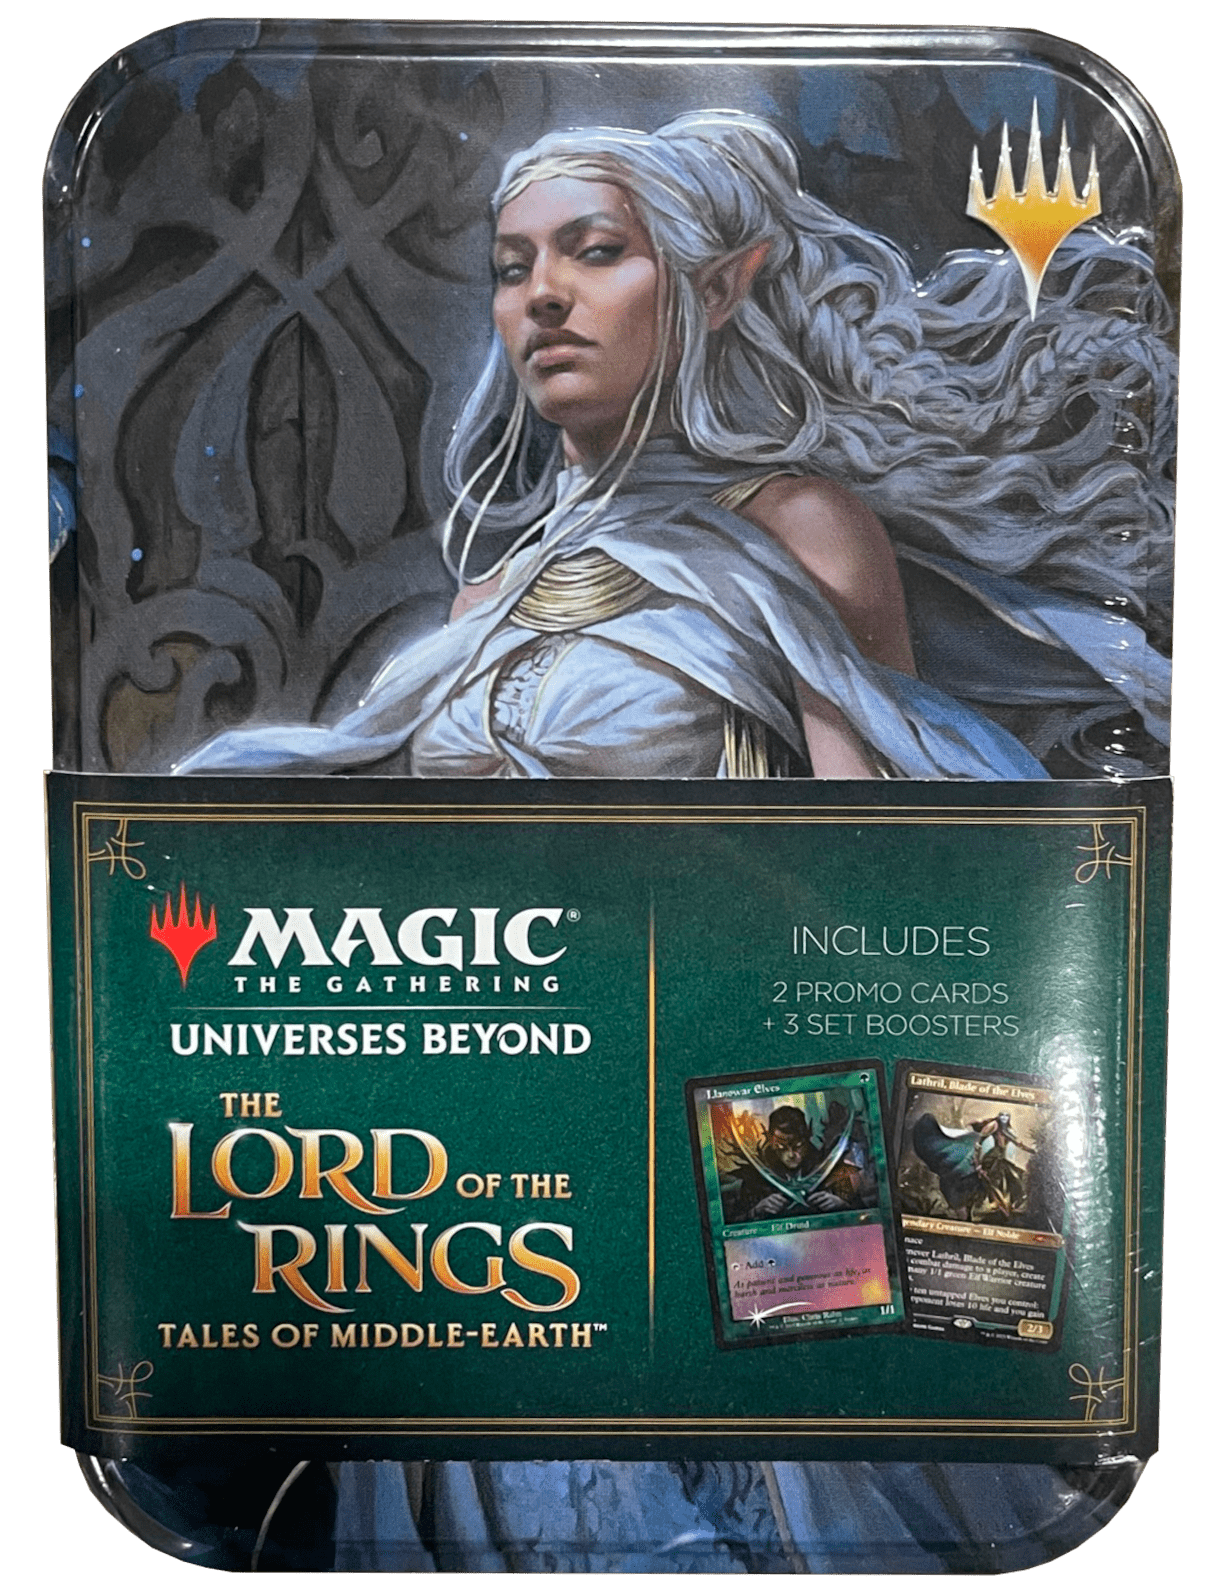 Lord of the Rings - Lady Galadriel - Large Bookmark – Gold Leaf Book Box